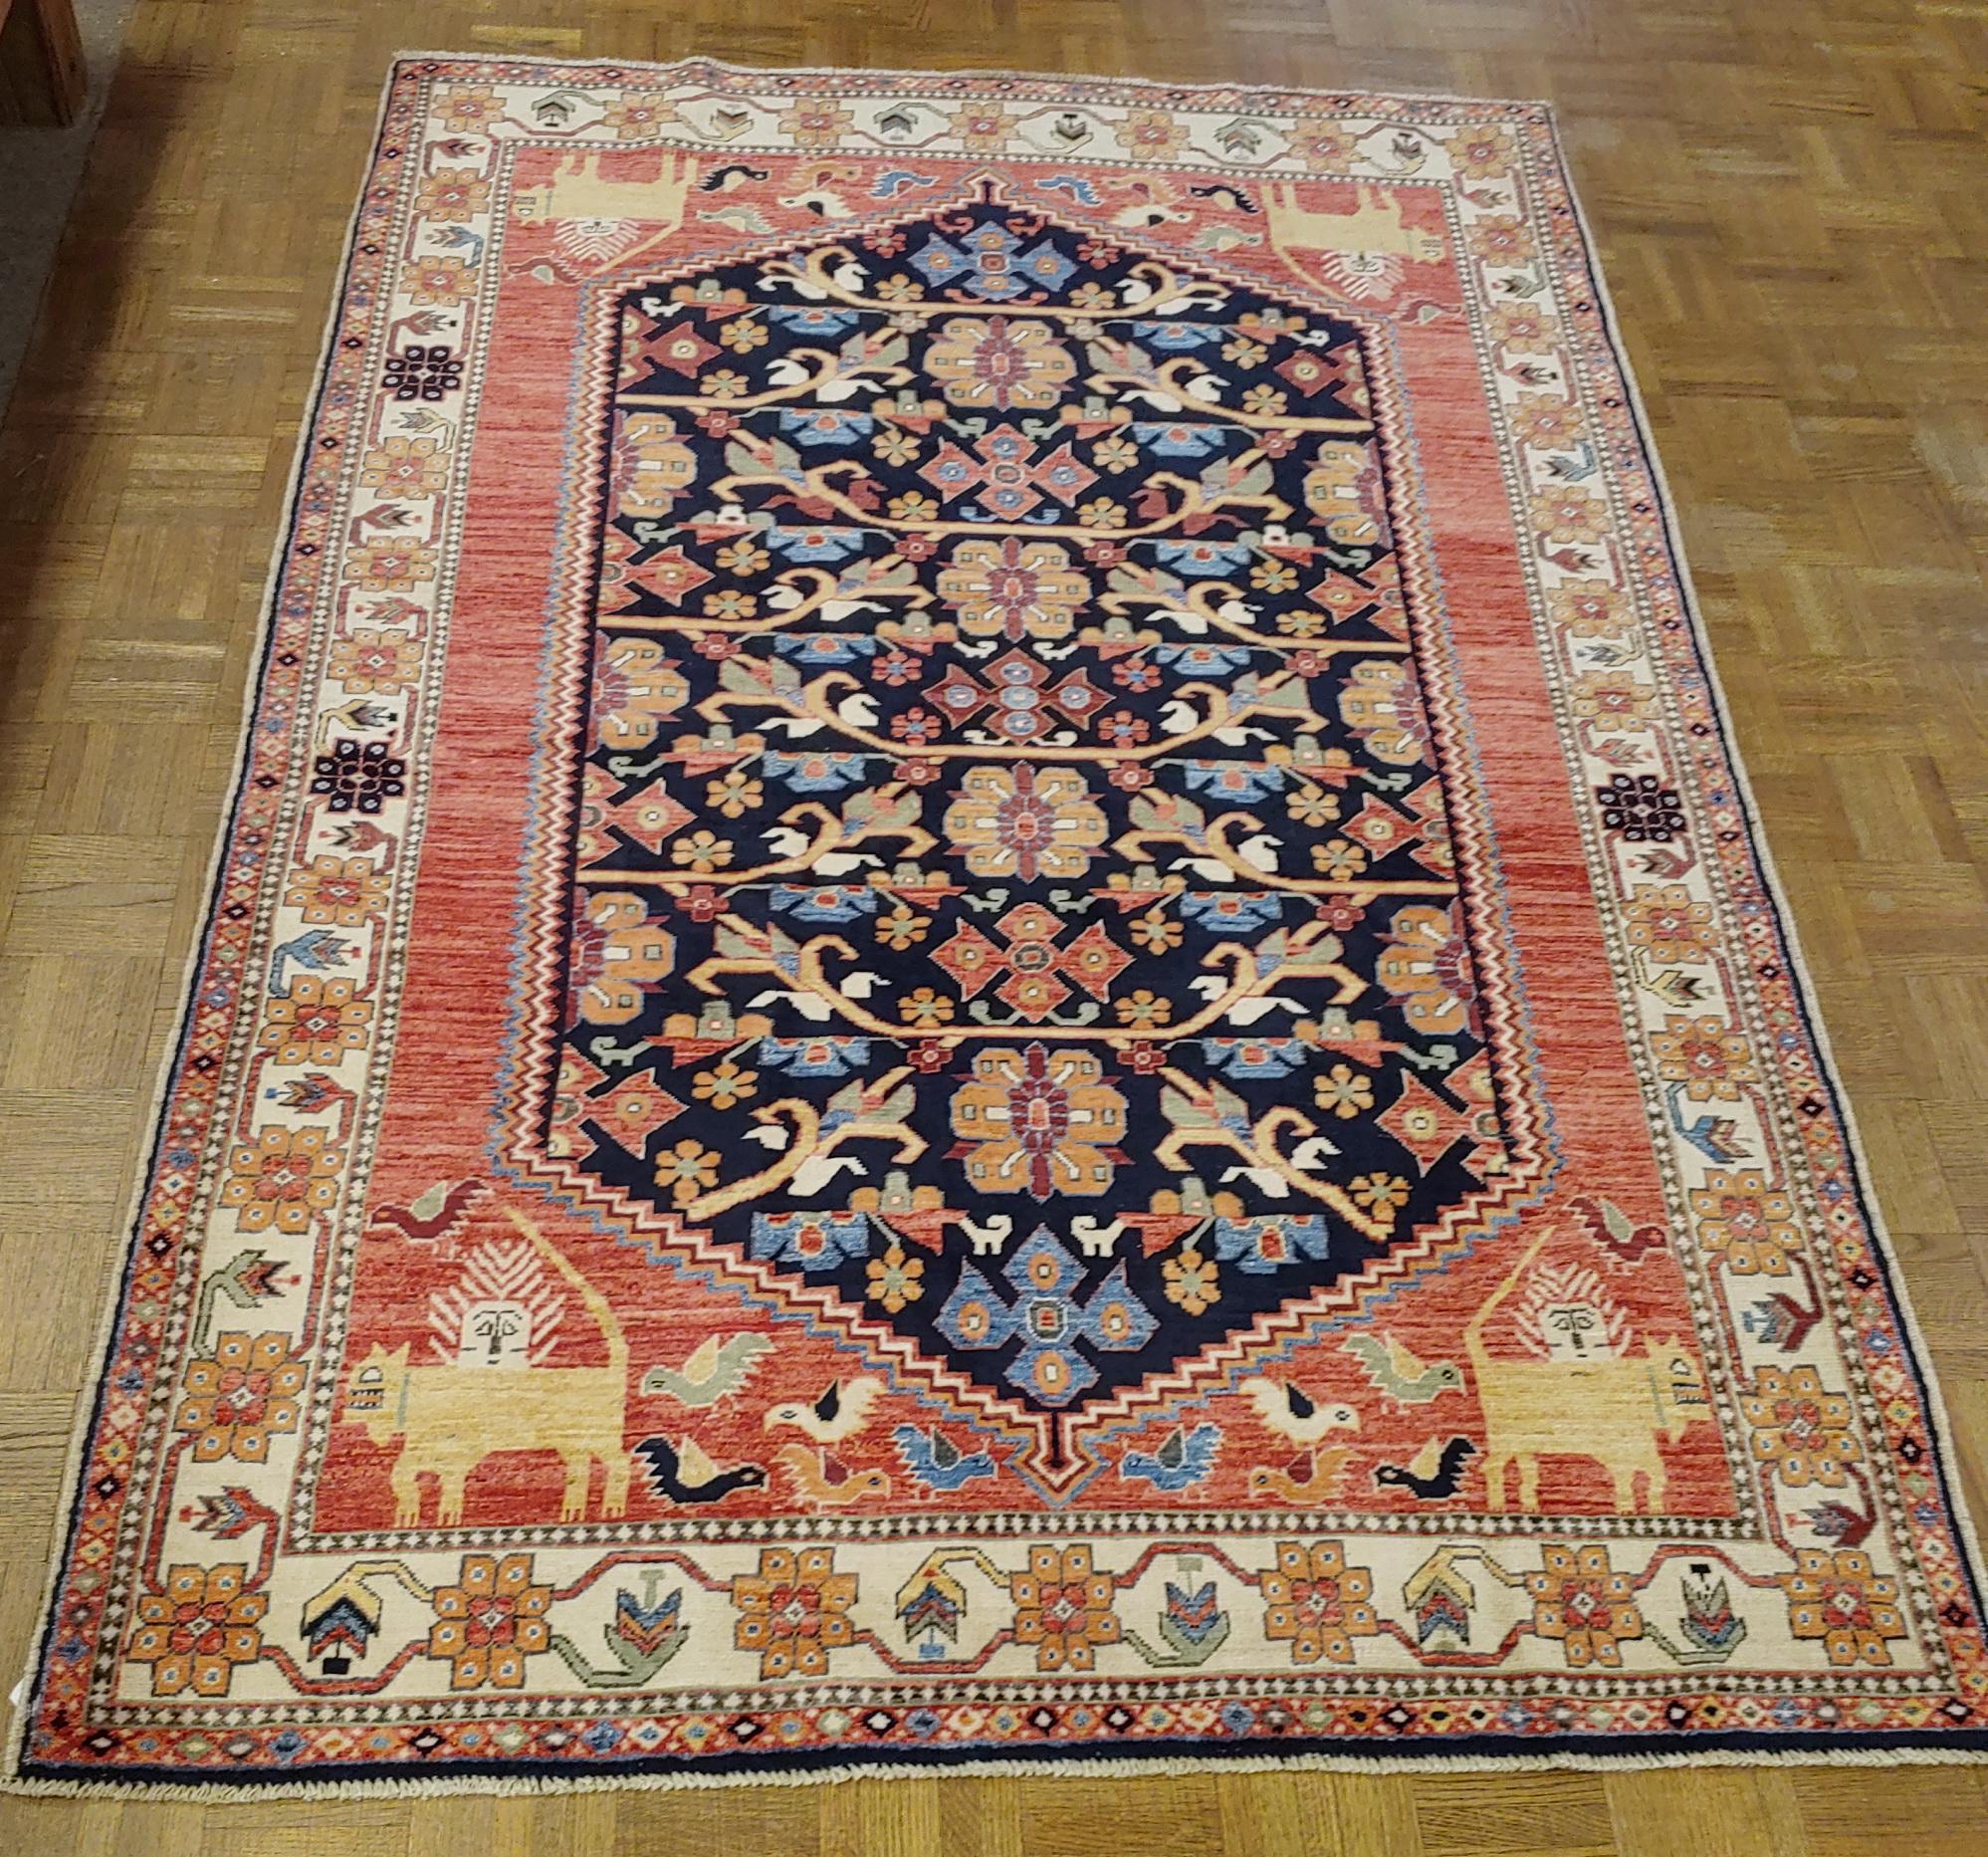 New Rug From Afghanistan, Persian Qashqai Shiraz Design, Wool, Natural Dyes 4x6 For Sale 1